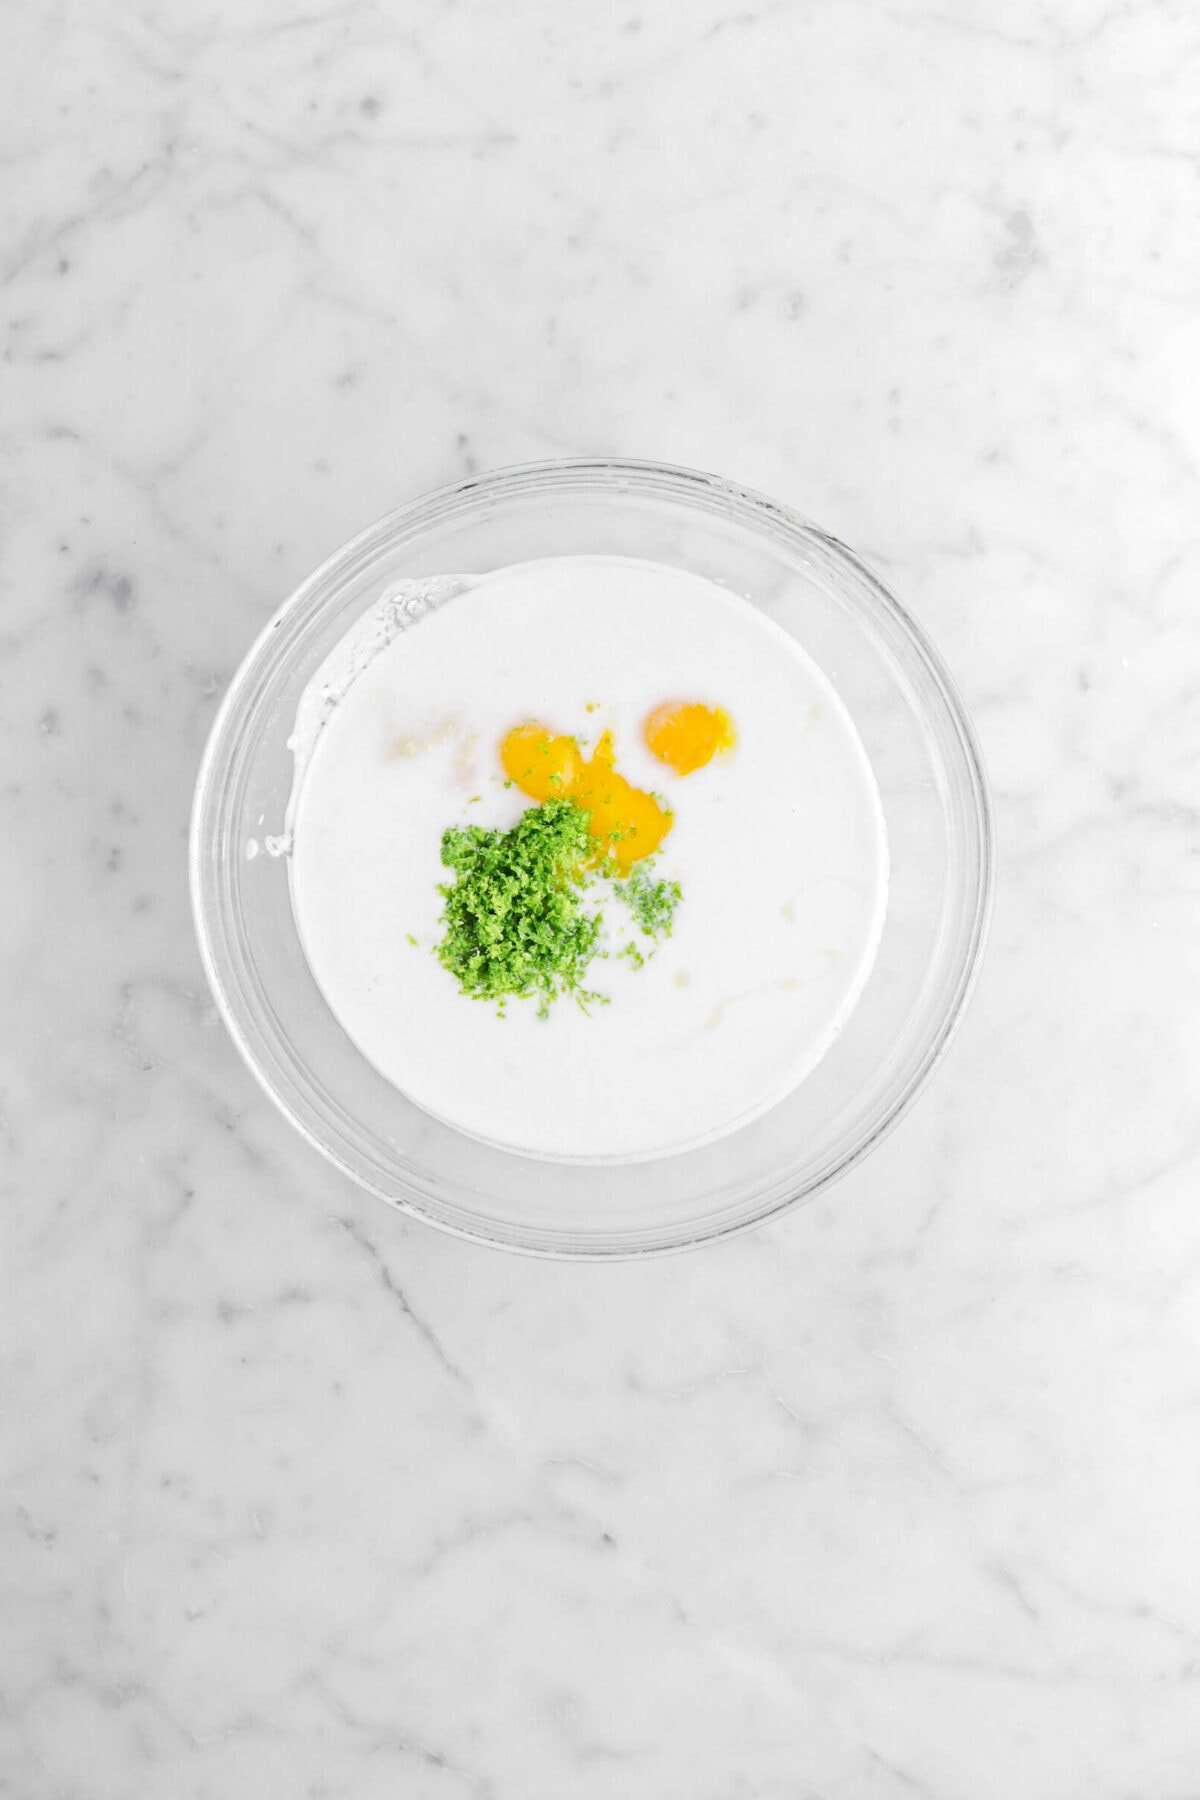 milk, key lime zest, egg yolks, and grated ginger in glass bowl.